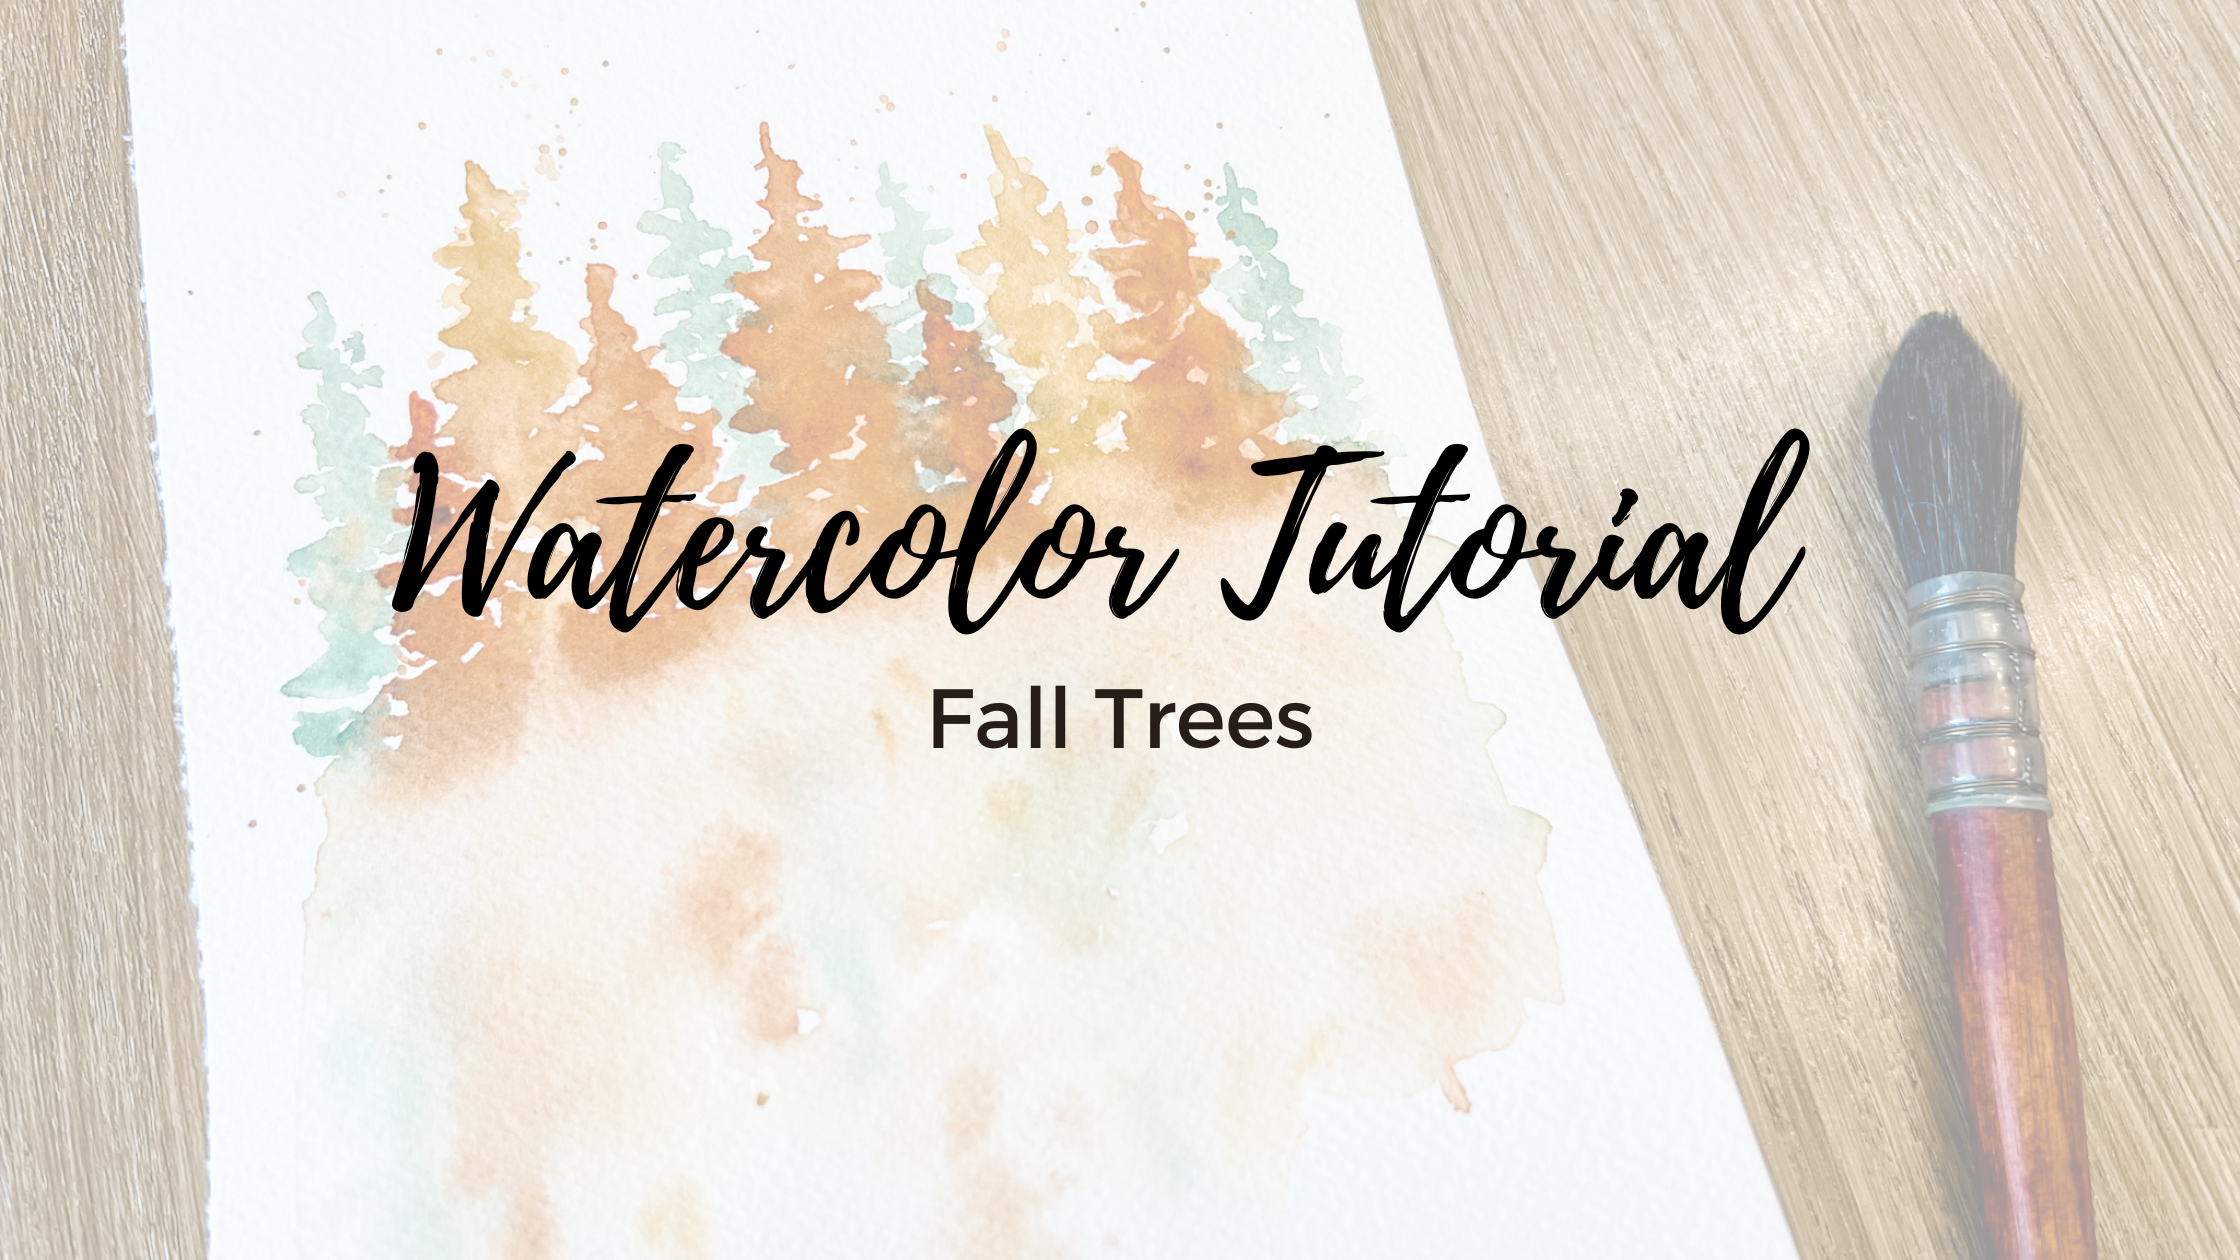 Watercolor Fall Trees with Reflection